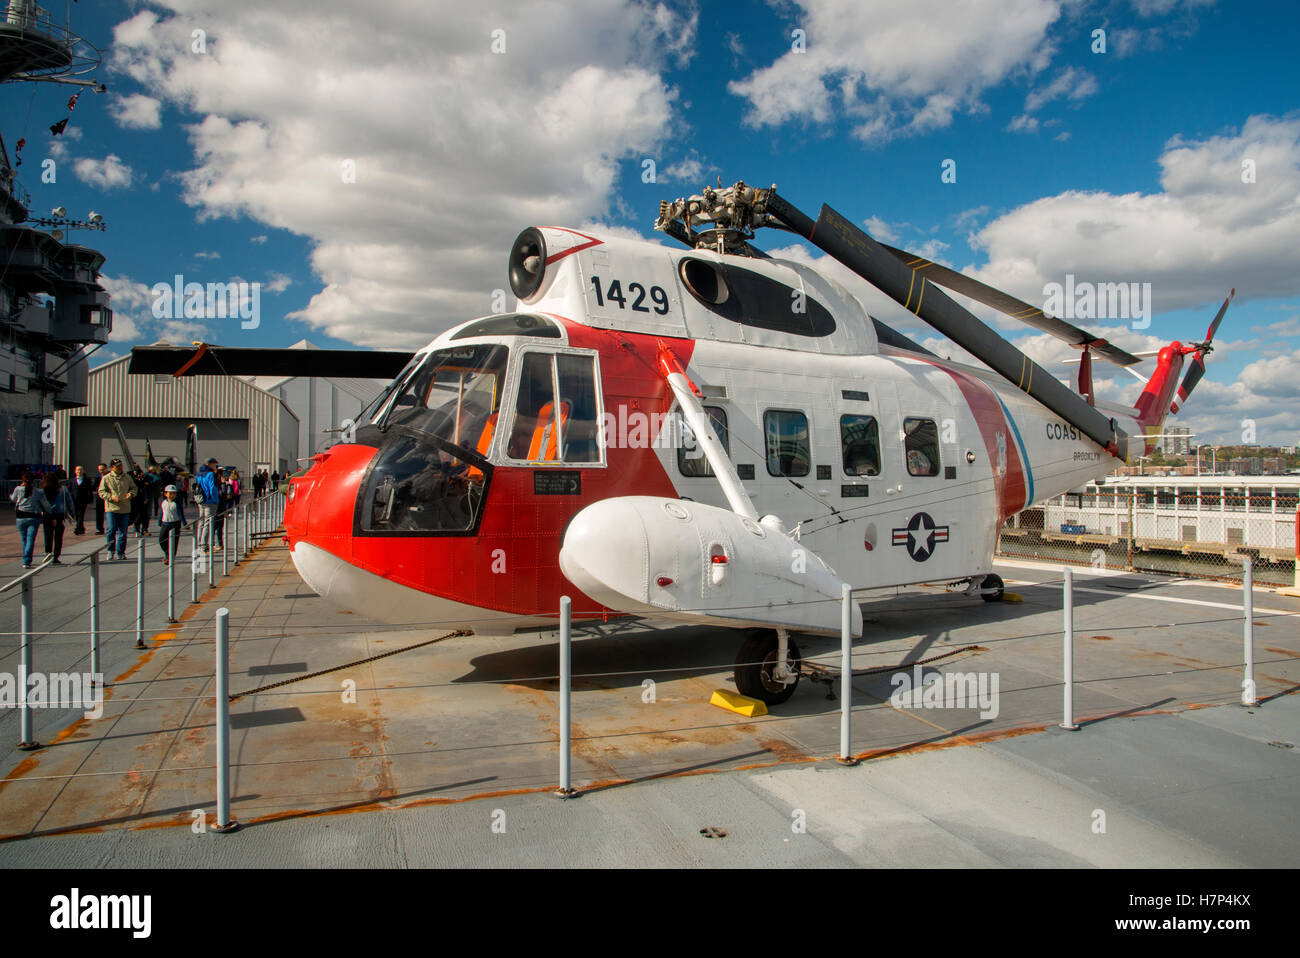 Sikorsky Sea King US Coast Guard Helicopter on the deck of USS Intrepid Museum of Air and Space in New York City Stock Photo